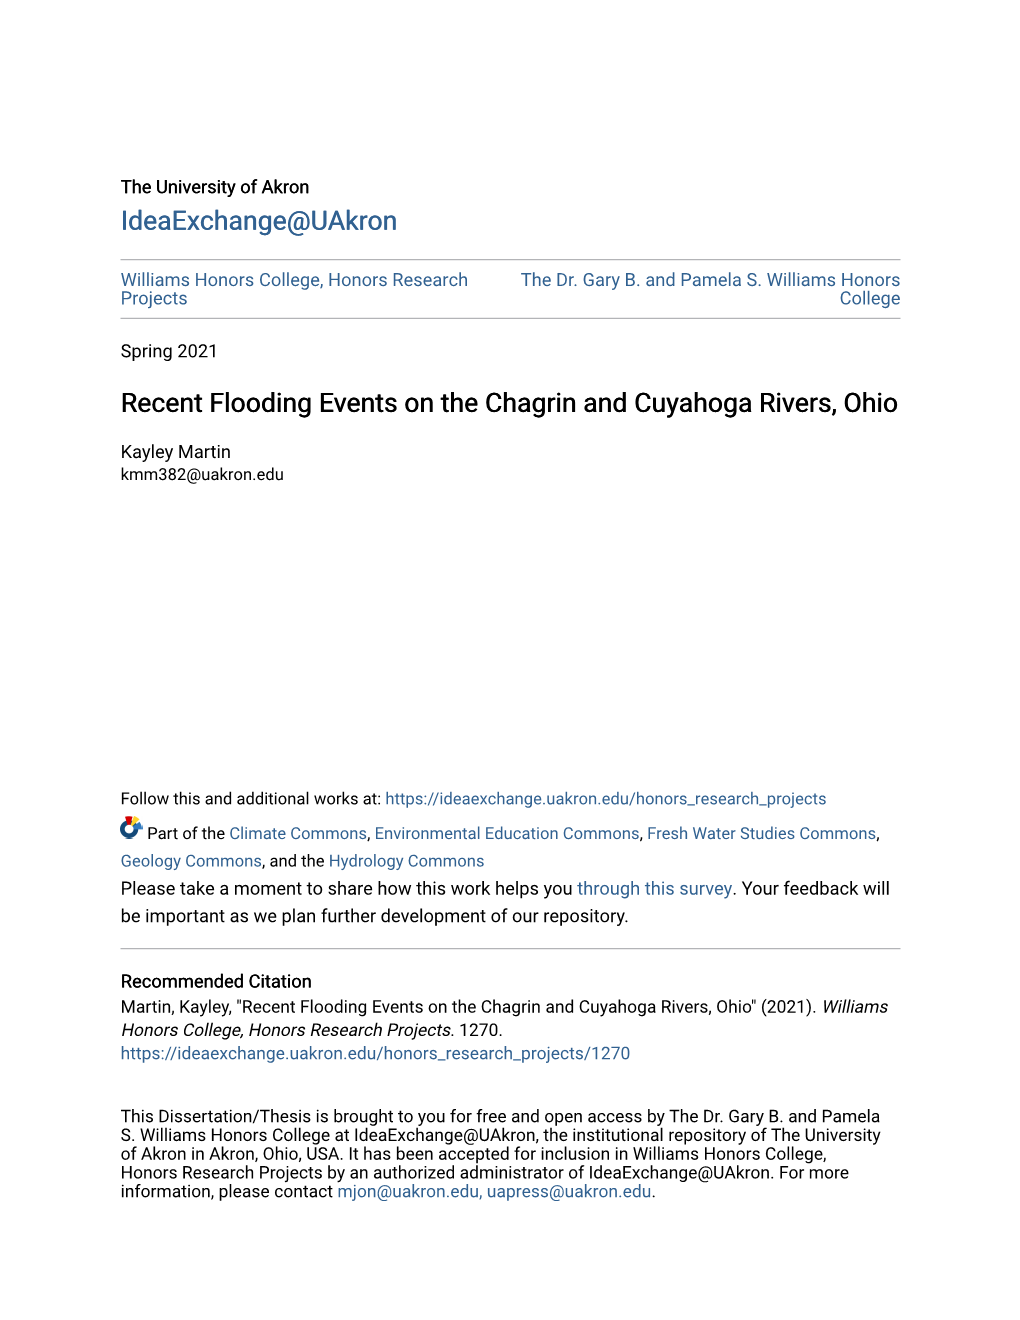 Recent Flooding Events on the Chagrin and Cuyahoga Rivers, Ohio